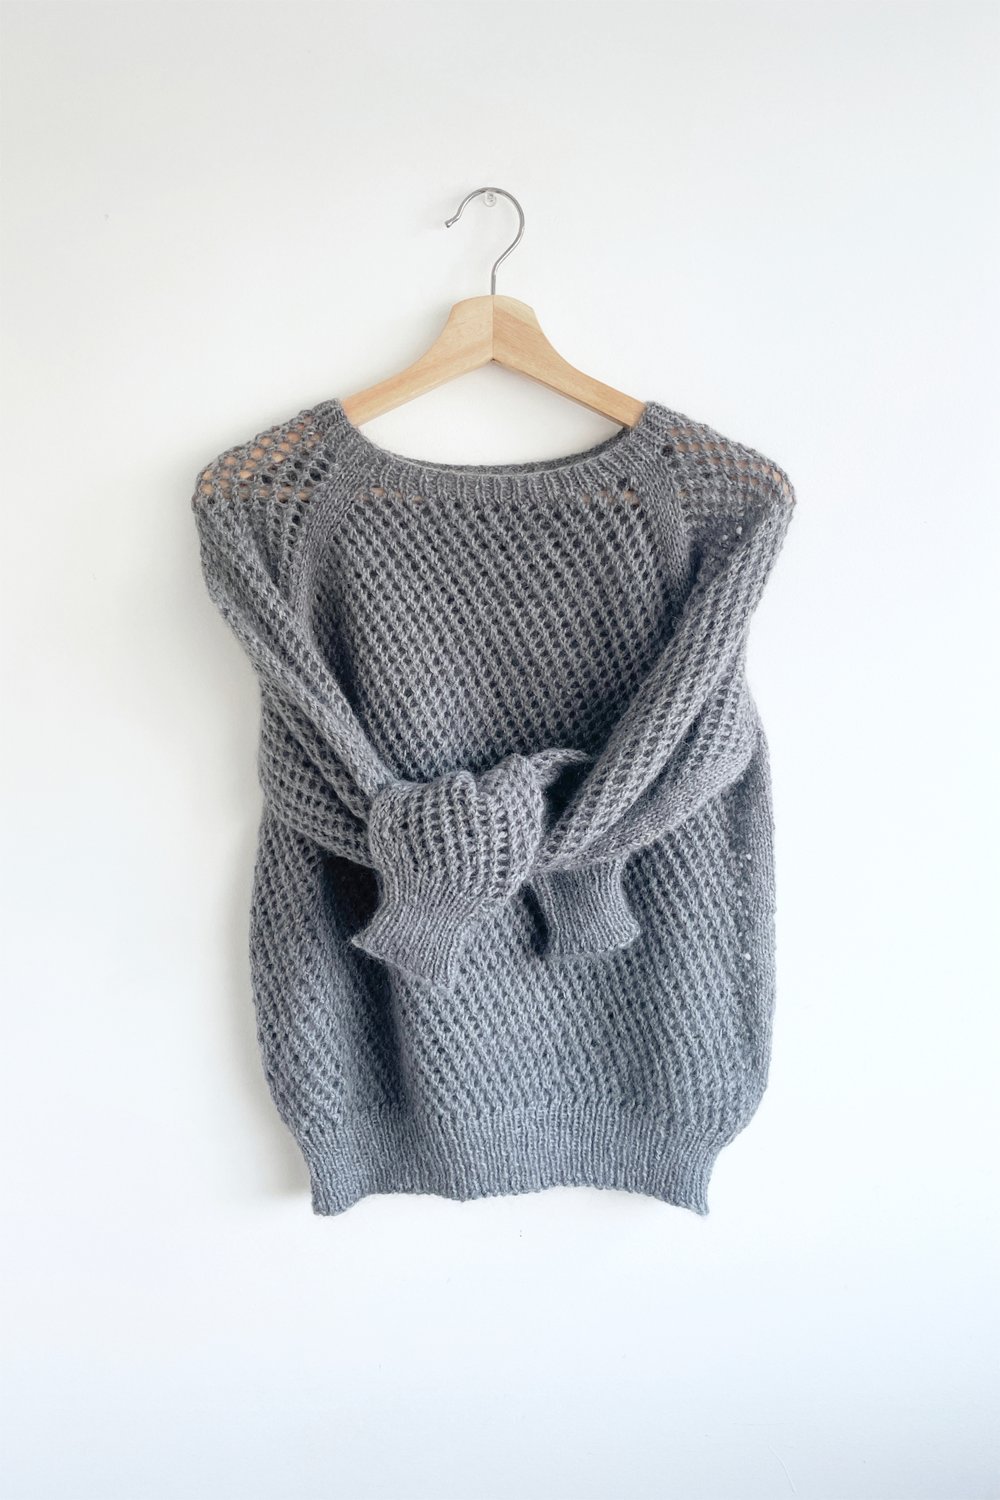 Simple Lace Pullover knitting pattern — Cleome Smith Knits